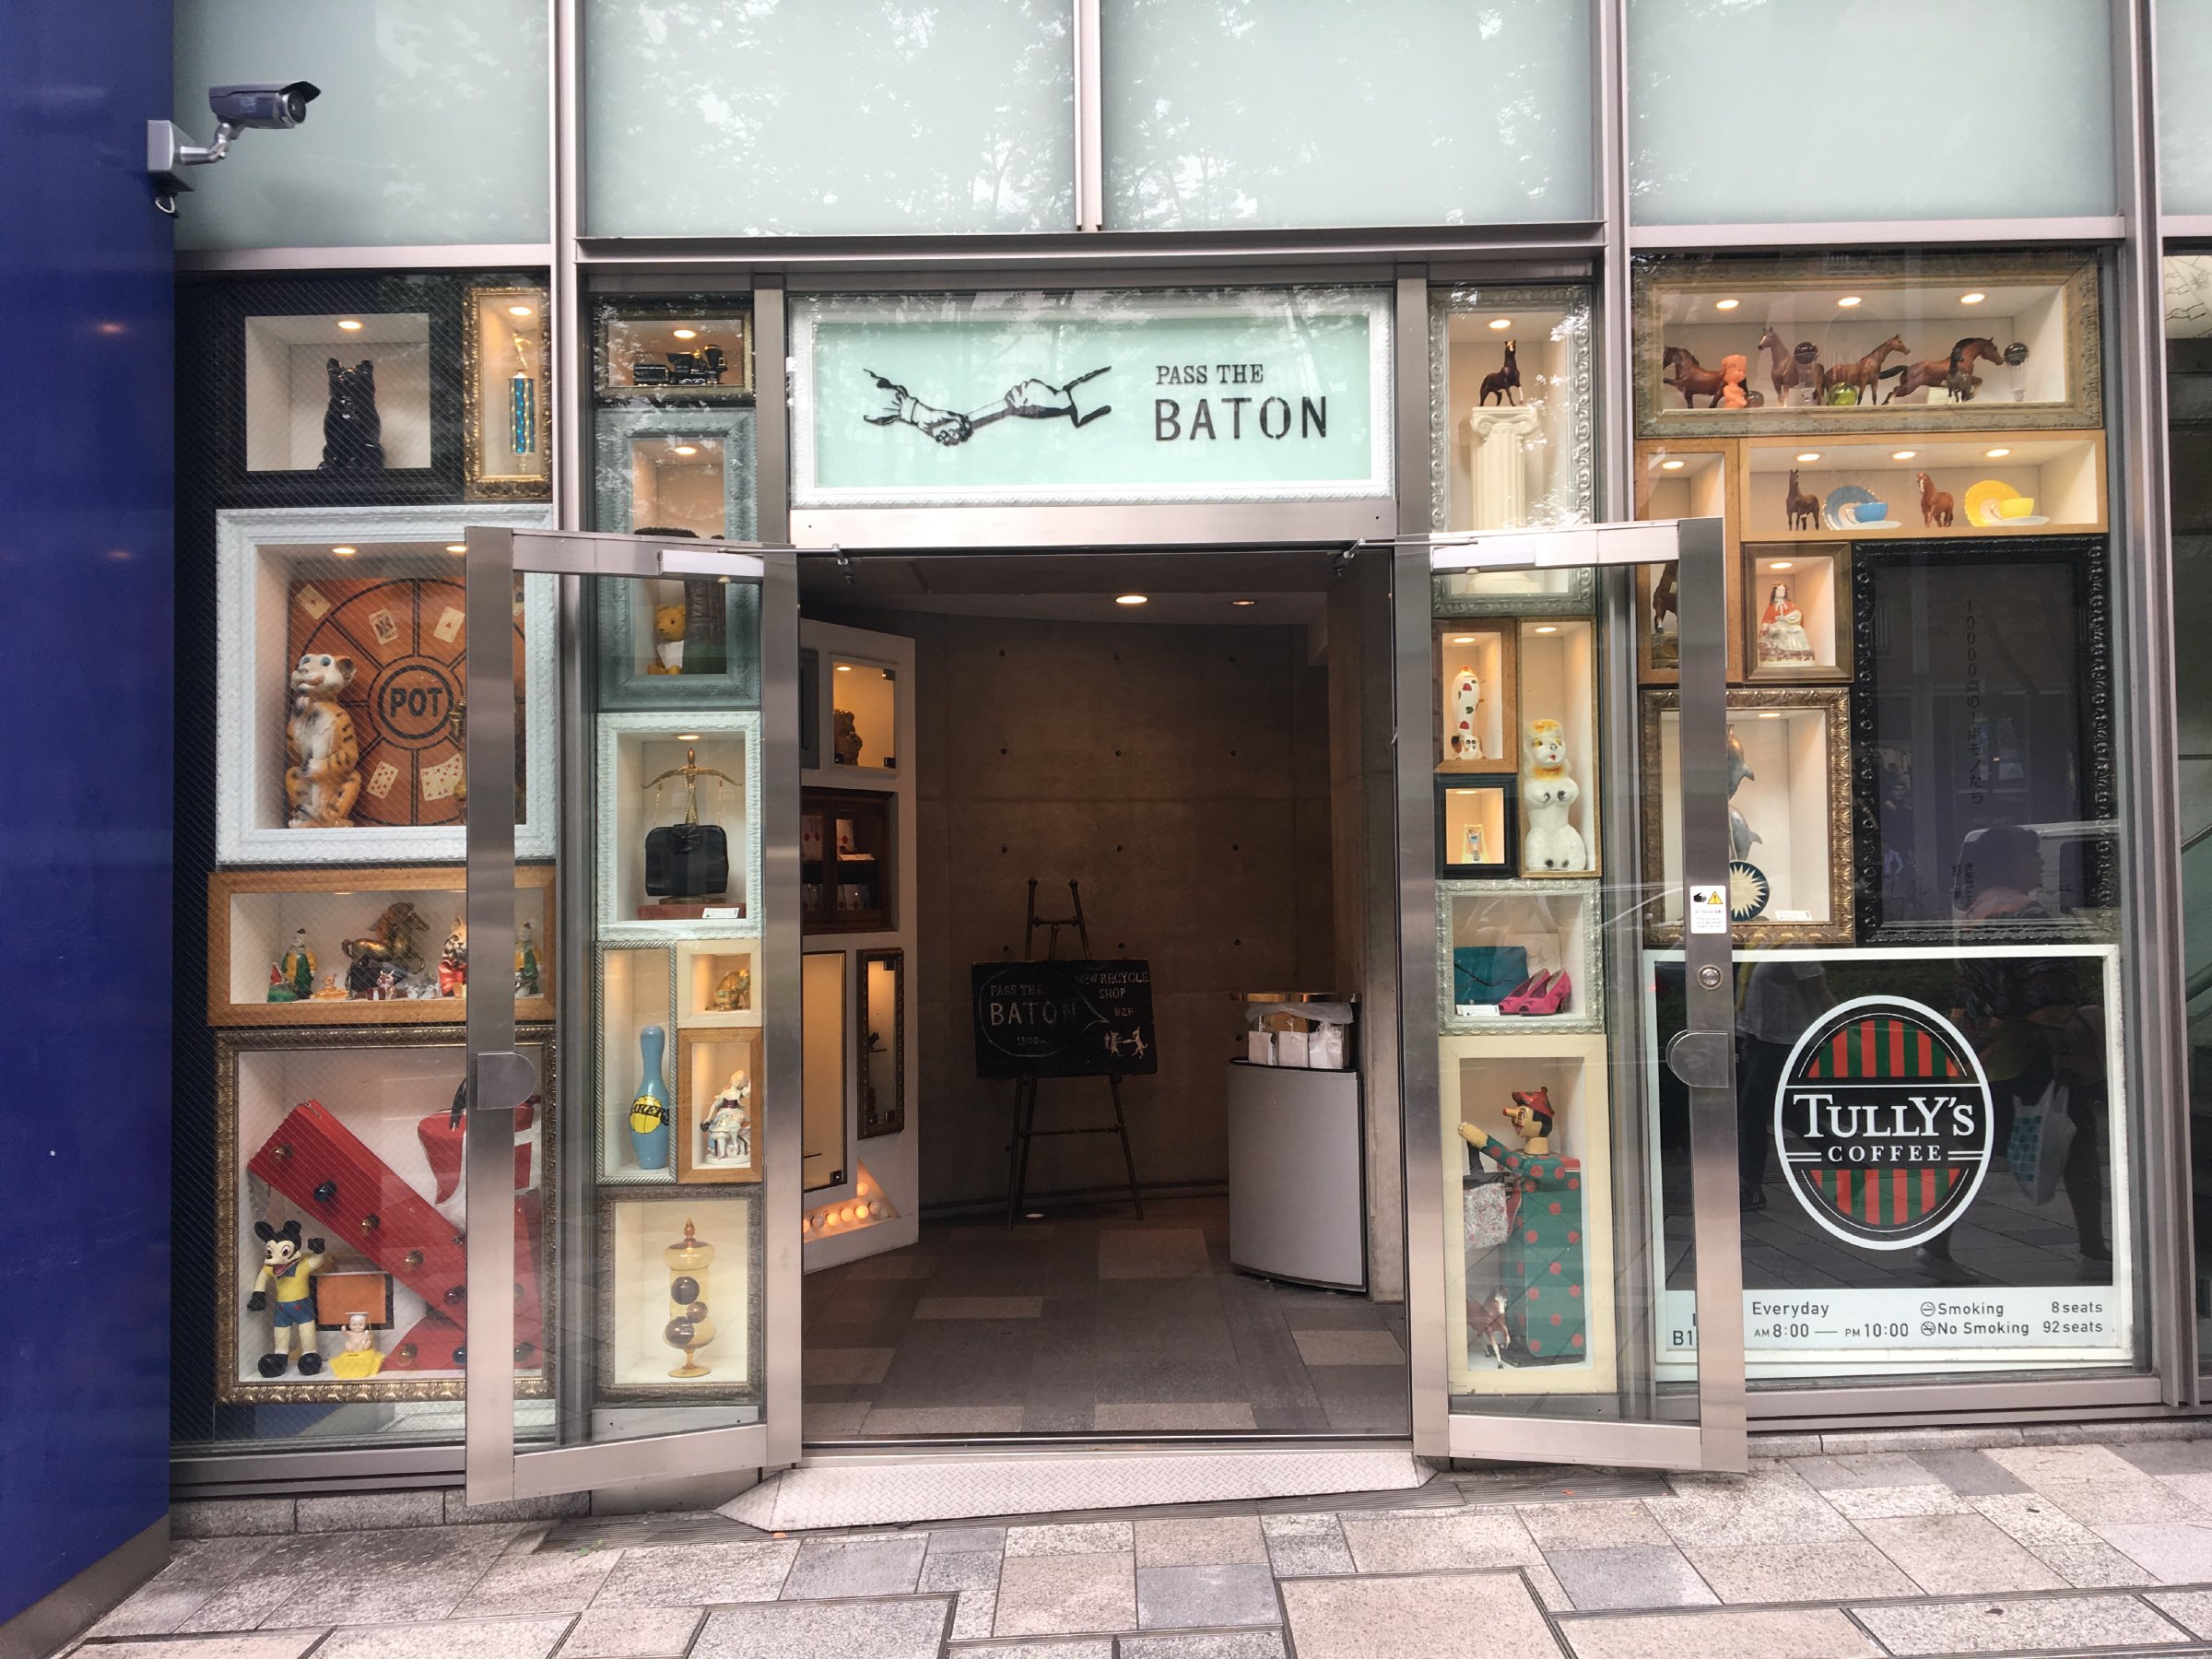 Pass the Baton | Tokyo, Japan Shopping - Lonely Planet